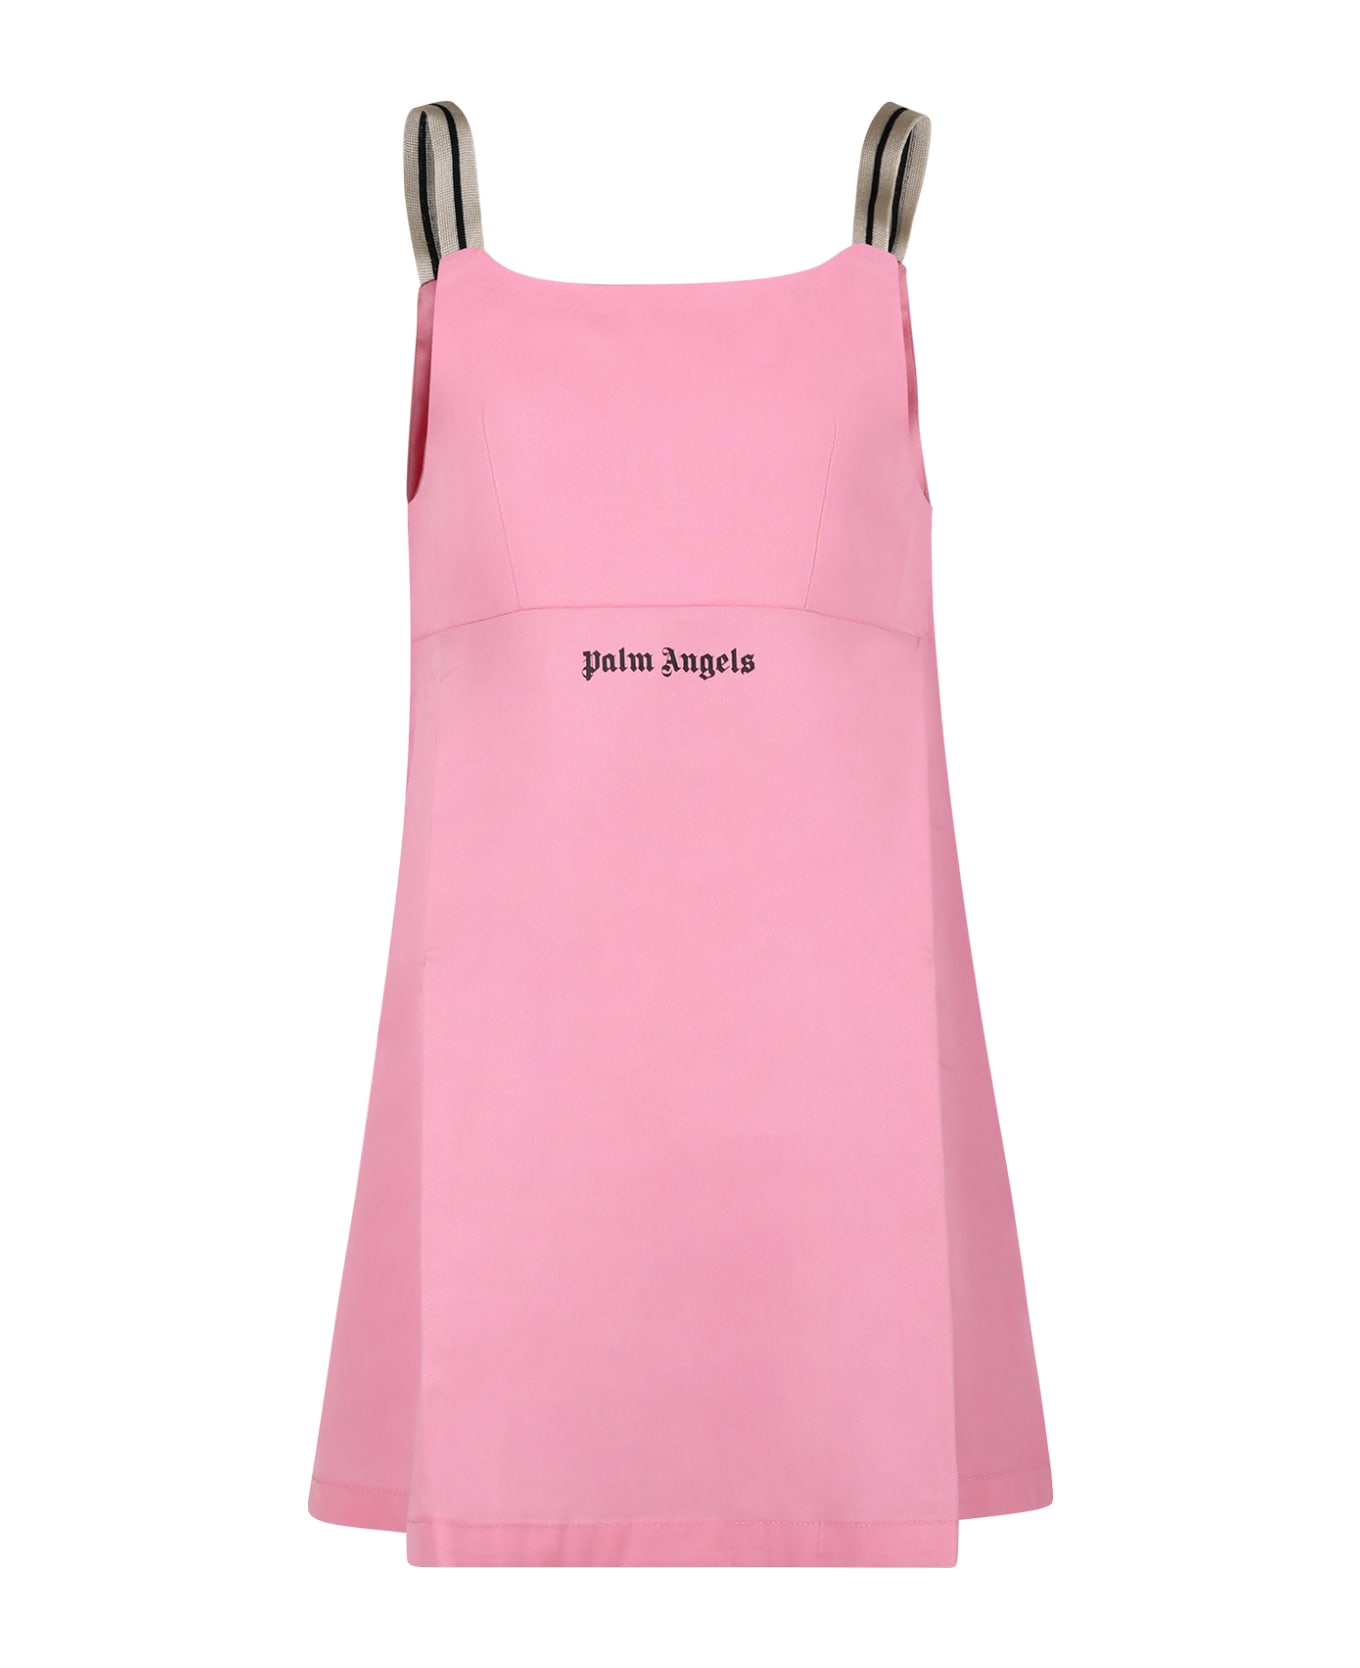 Palm Angels Pink Dress For Girl With Logo - Pink